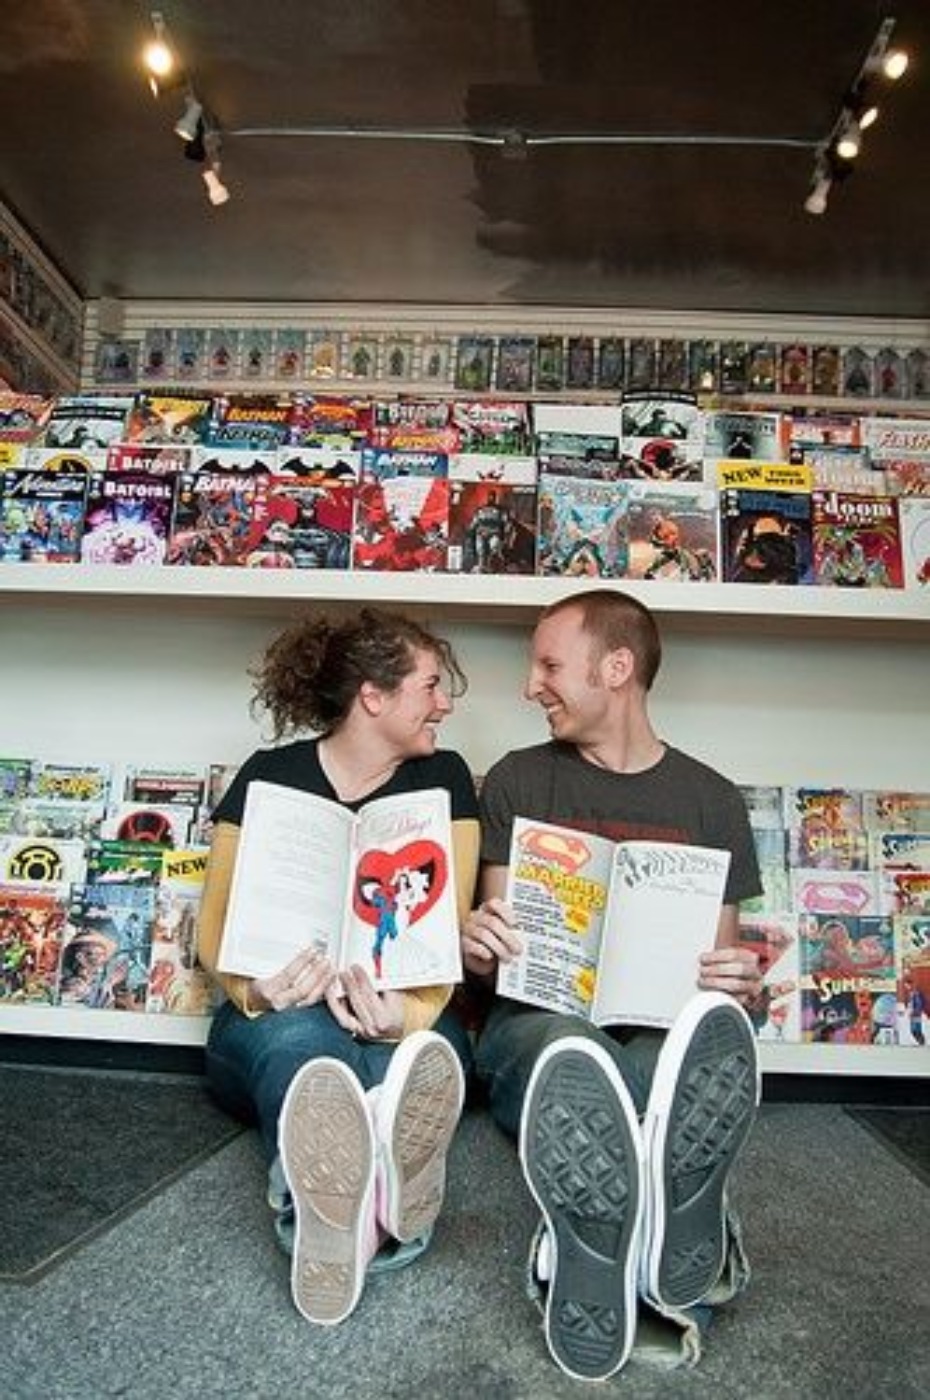 engagement-comic-book-store